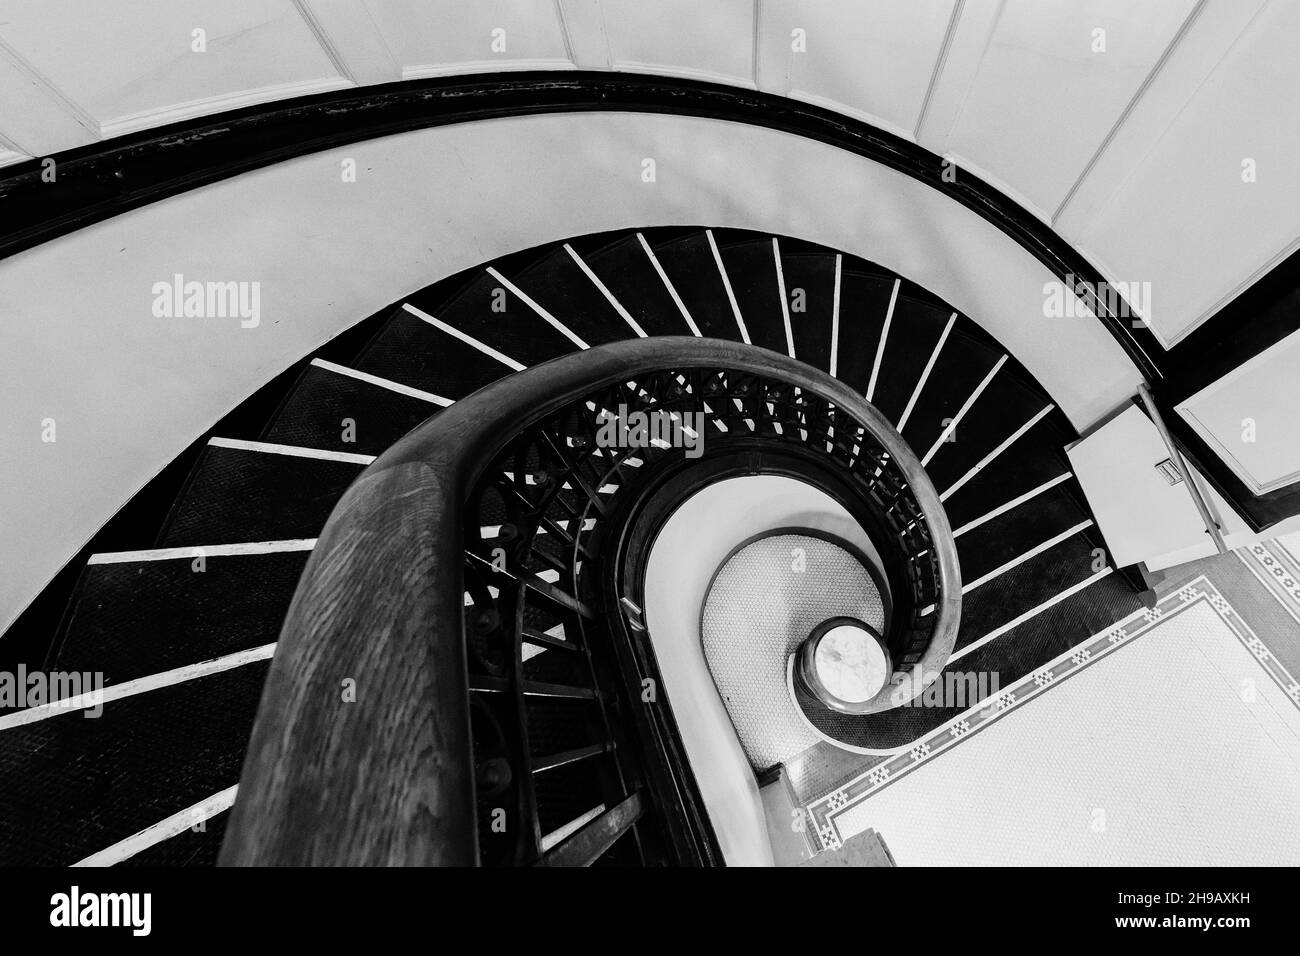 Grand spiral staircase in the Pacific County Courthouse, South Bend, Washington State, USA Stock Photo